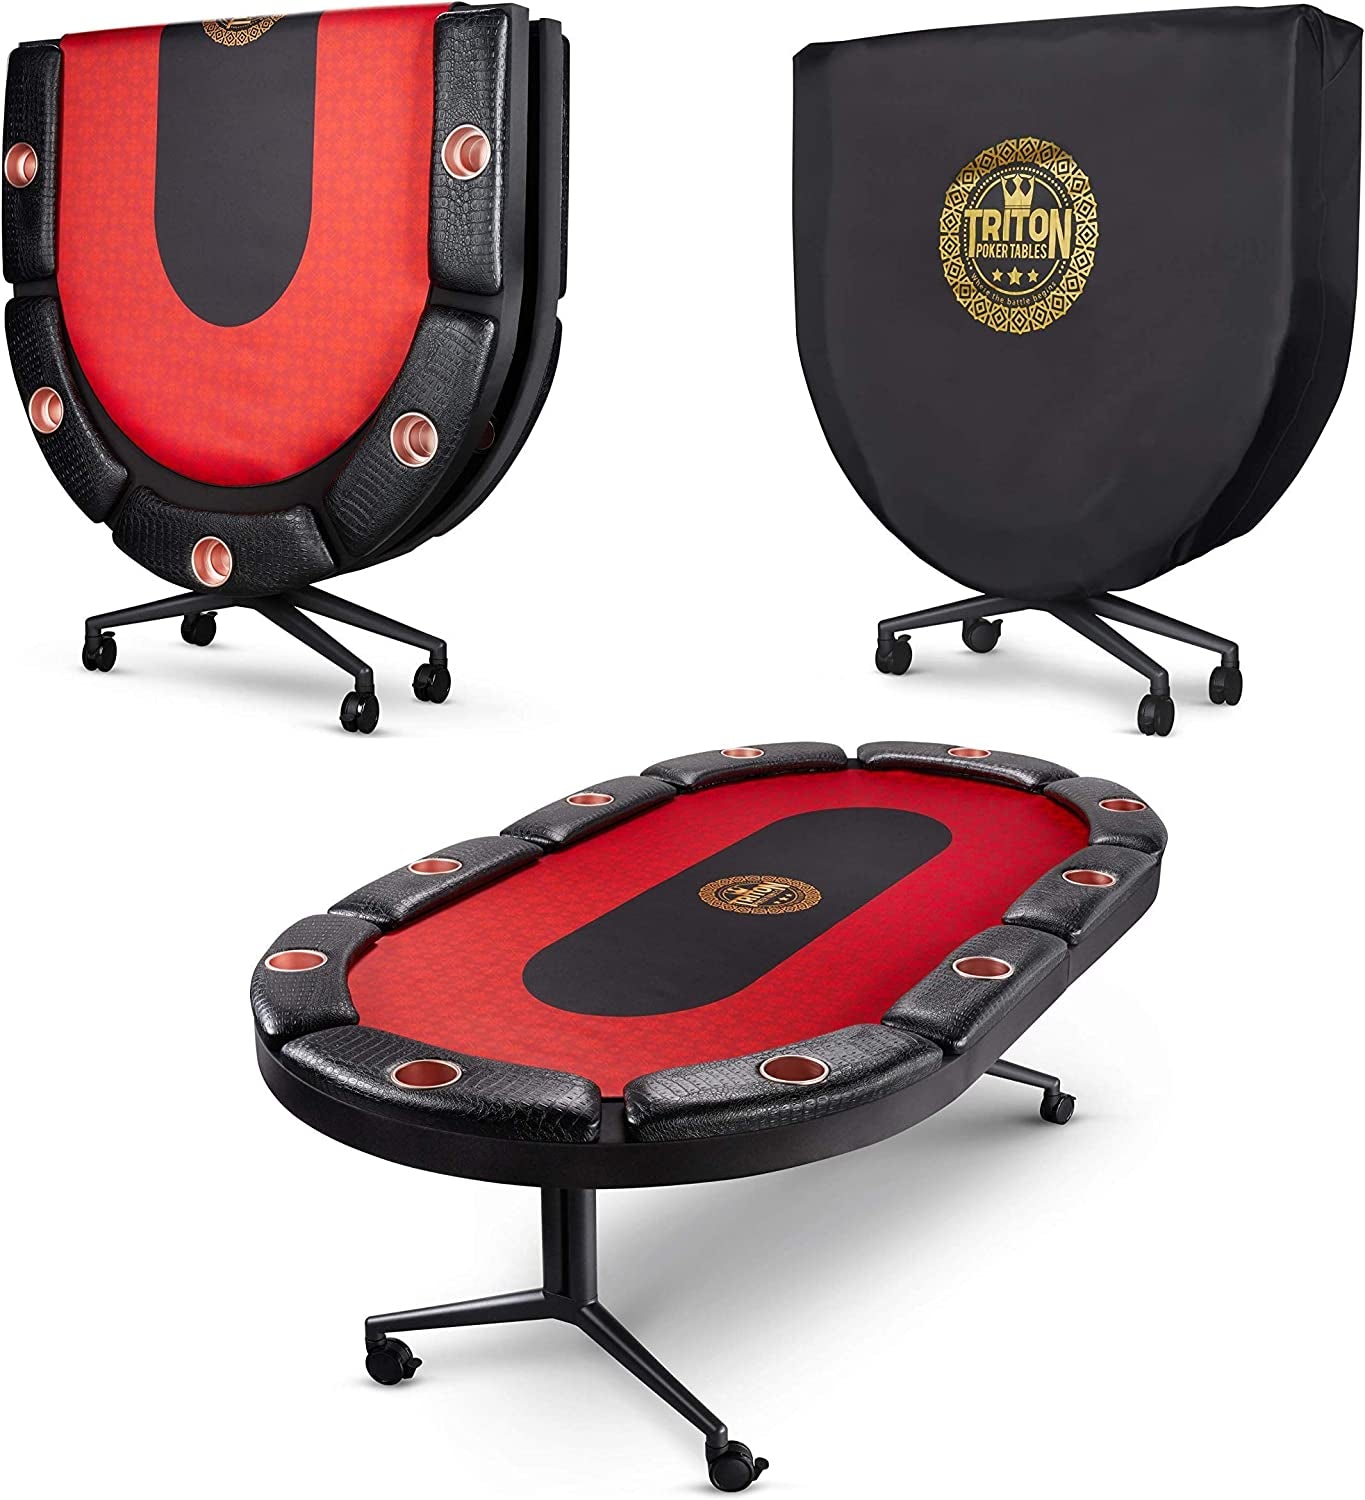 Triton Poker Folding Poker Table Casino Style - 10 Players Oval Portable Texas Hold'Em Poker Table with Mats (Included)